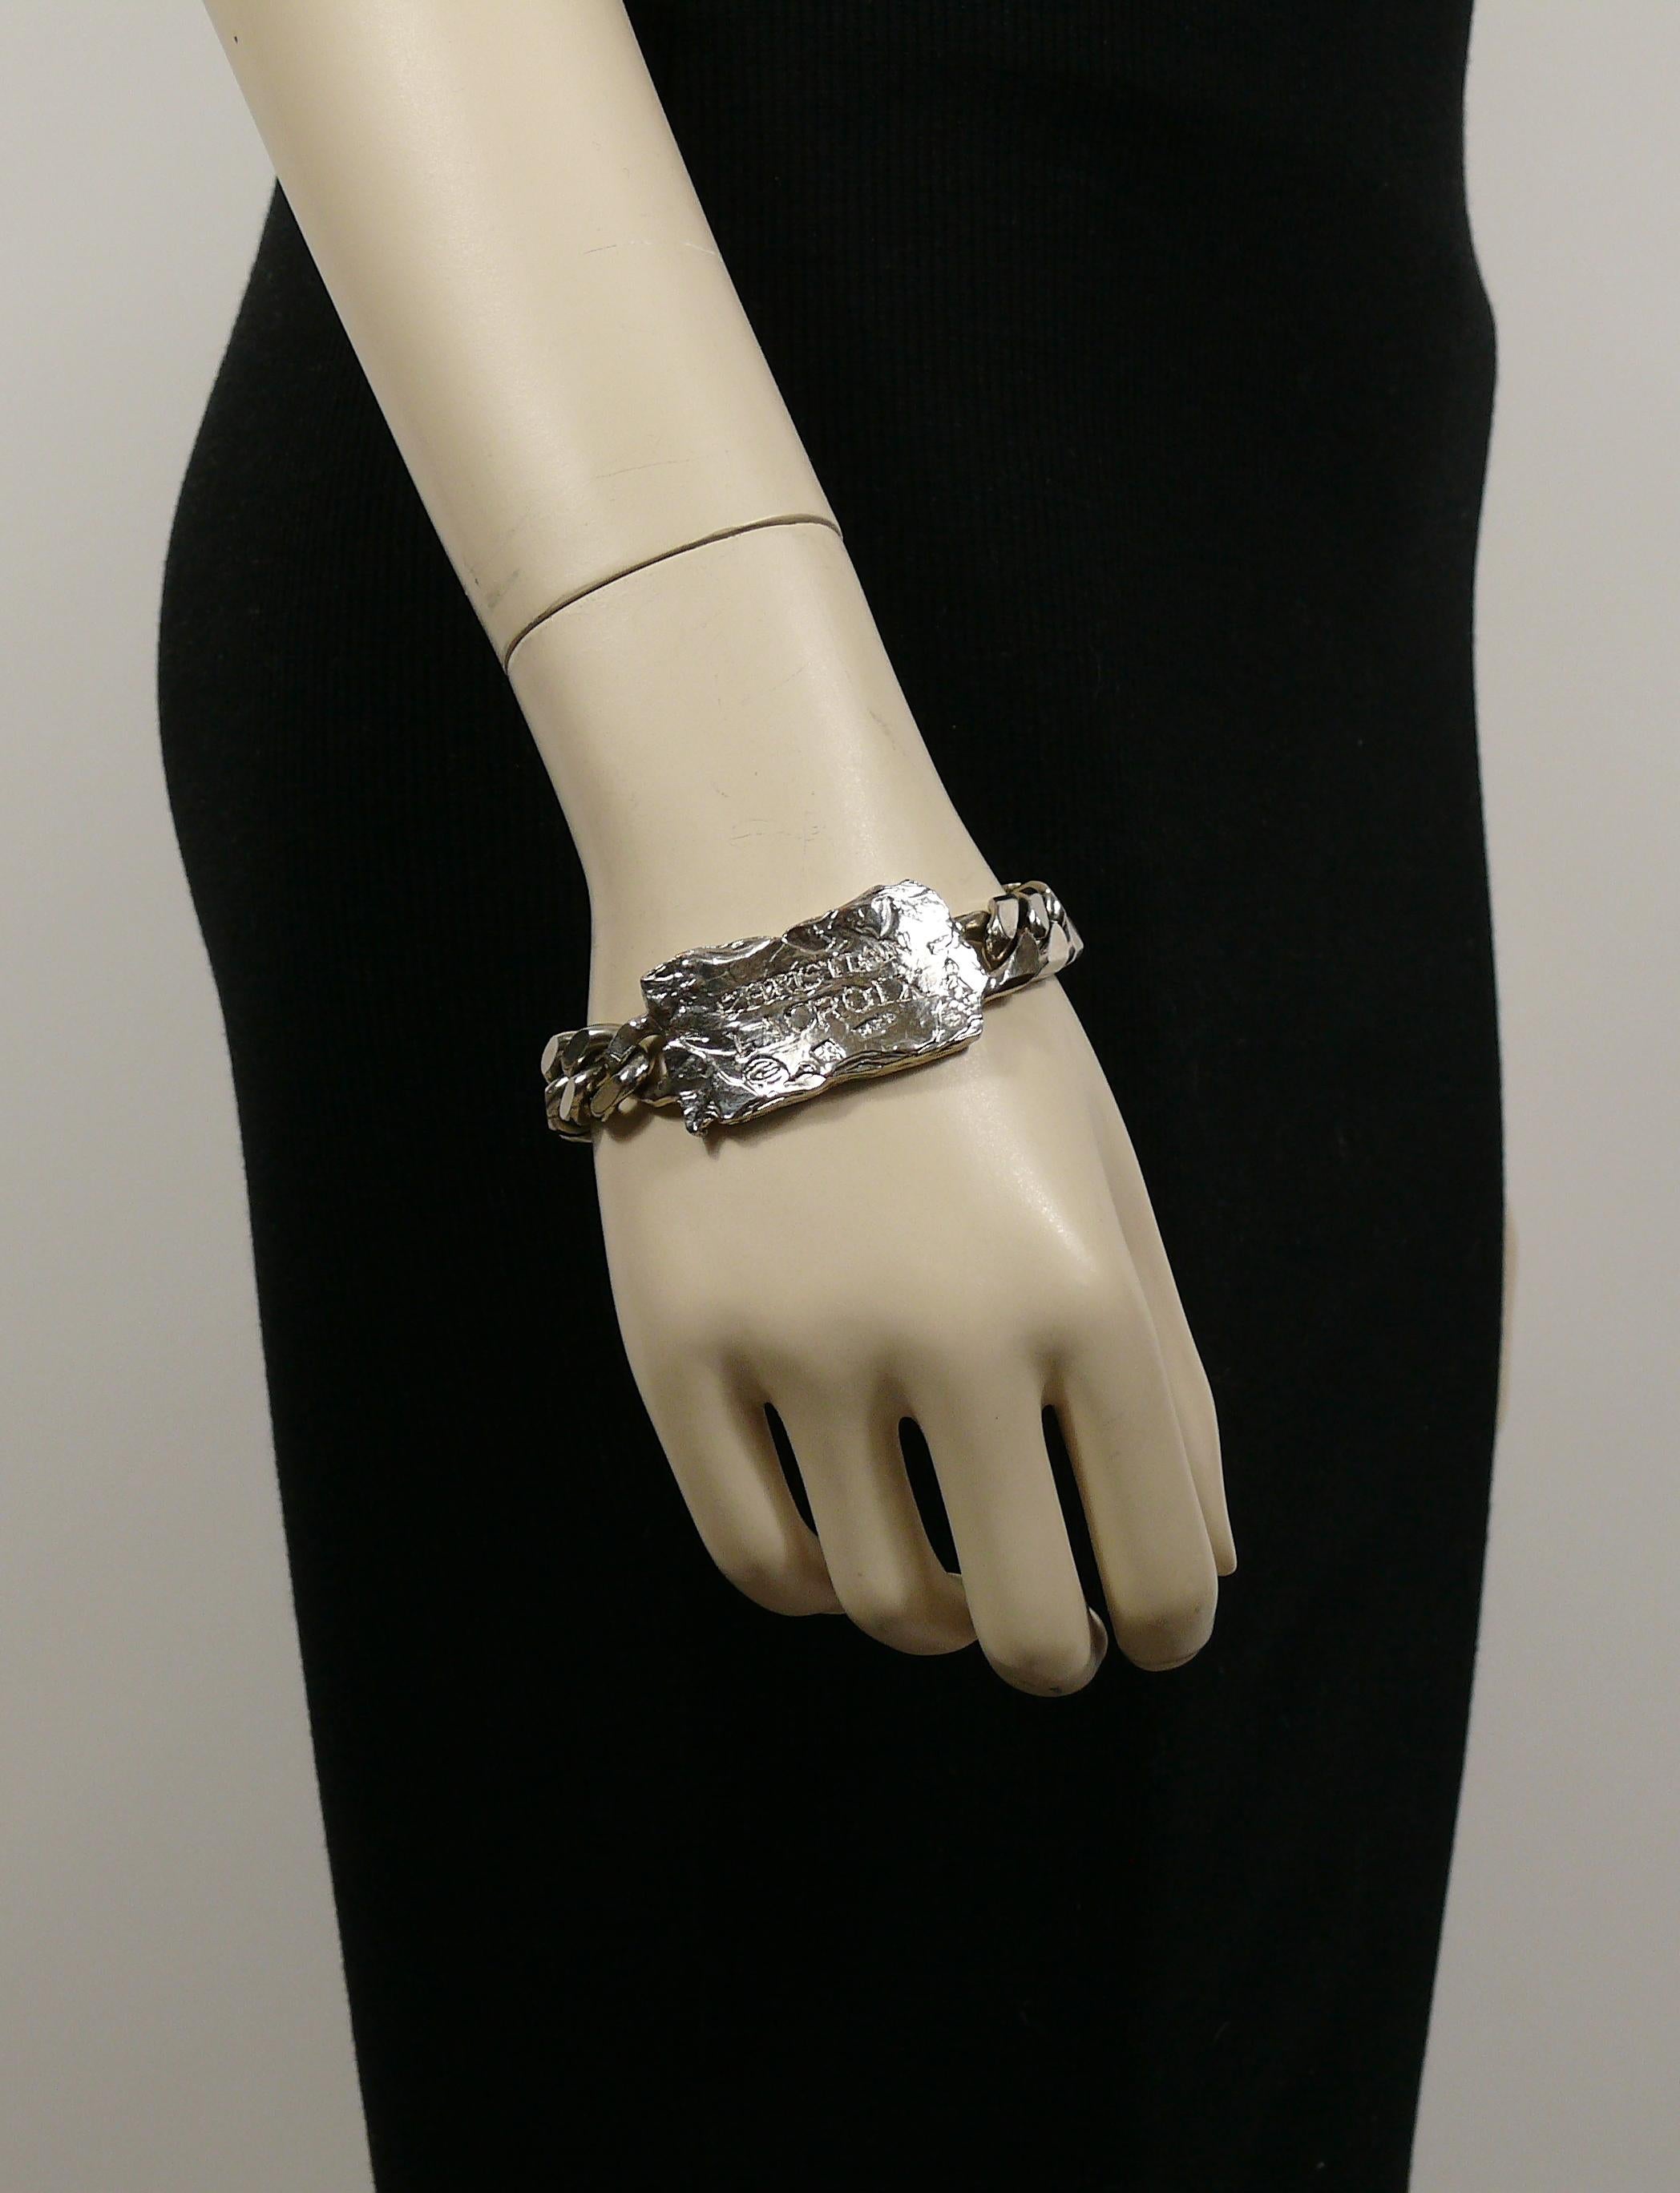 CHRISTIAN LACROIX vintage rare silver toned ID tag curb bracelet.

This bracelet features :
- Massive curb chain links
- Textured ID tag plate embossed CHRISTIAN LACROIX Paris
- Secure clasp

Marked CHRISTIAN LACROIX CL Made in France.

Indicative